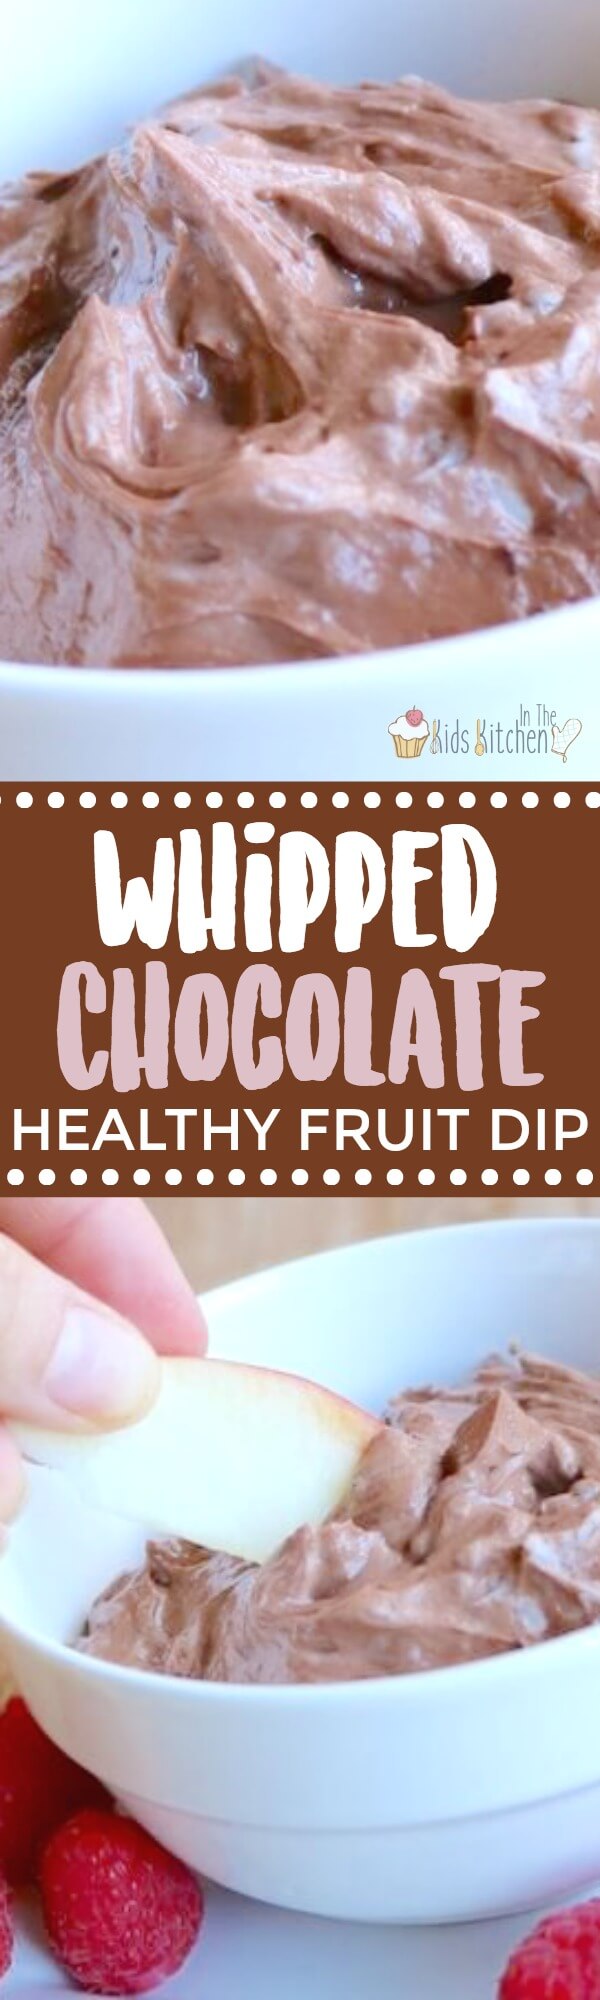 Make eating fruit a lot more fun with this healthy chocolate fruit dip! Only 4 simple real food ingredients and ready in minutes - this fluffy chocolate spread pairs perfectly with fruit as an after school snack. It also makes a sweet party dip! #chocolate #healthyrecipes